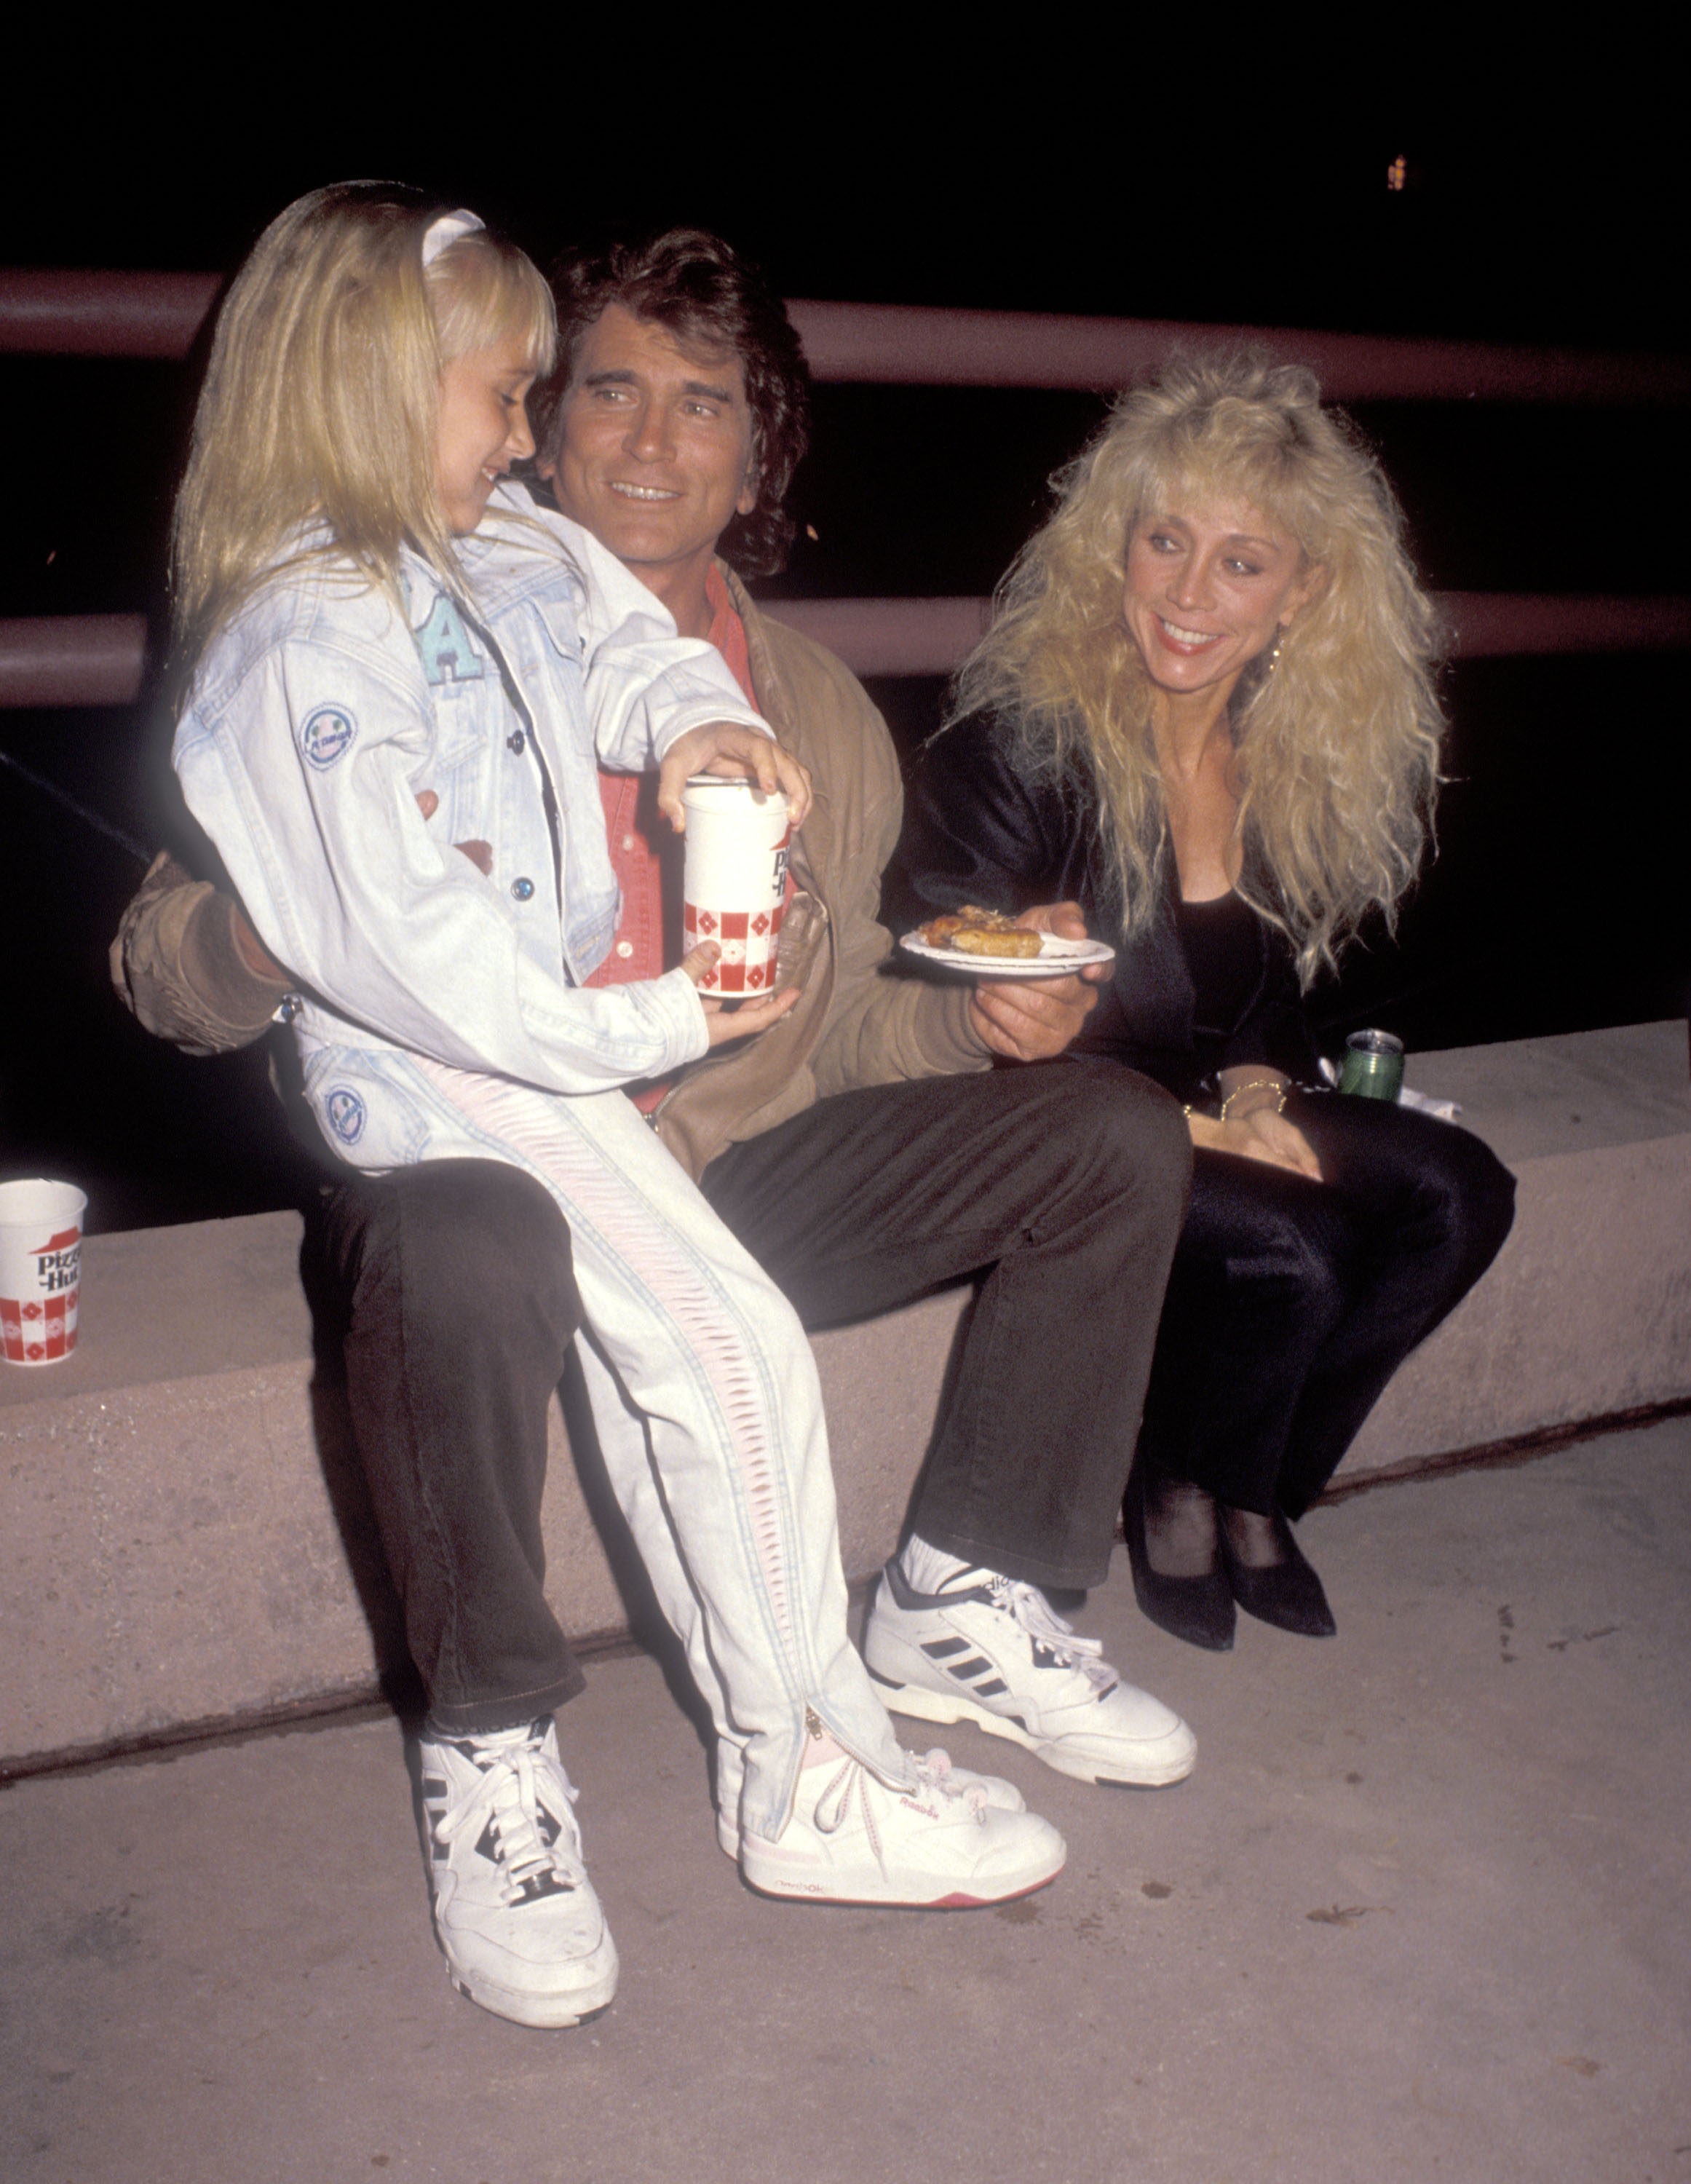 UNIVERSAL CITY,CA - NOVEMBER 21: Actor Michael Landon, wife Cindy Landon and daughter Jennifer Landon attend the "Teenage Mutant Ninja Turtles: Coming Out of Their Shells" Concert and Theatrical Performance on November 21, 1990 at Universal Amphitheatre in Univeral City, California. 